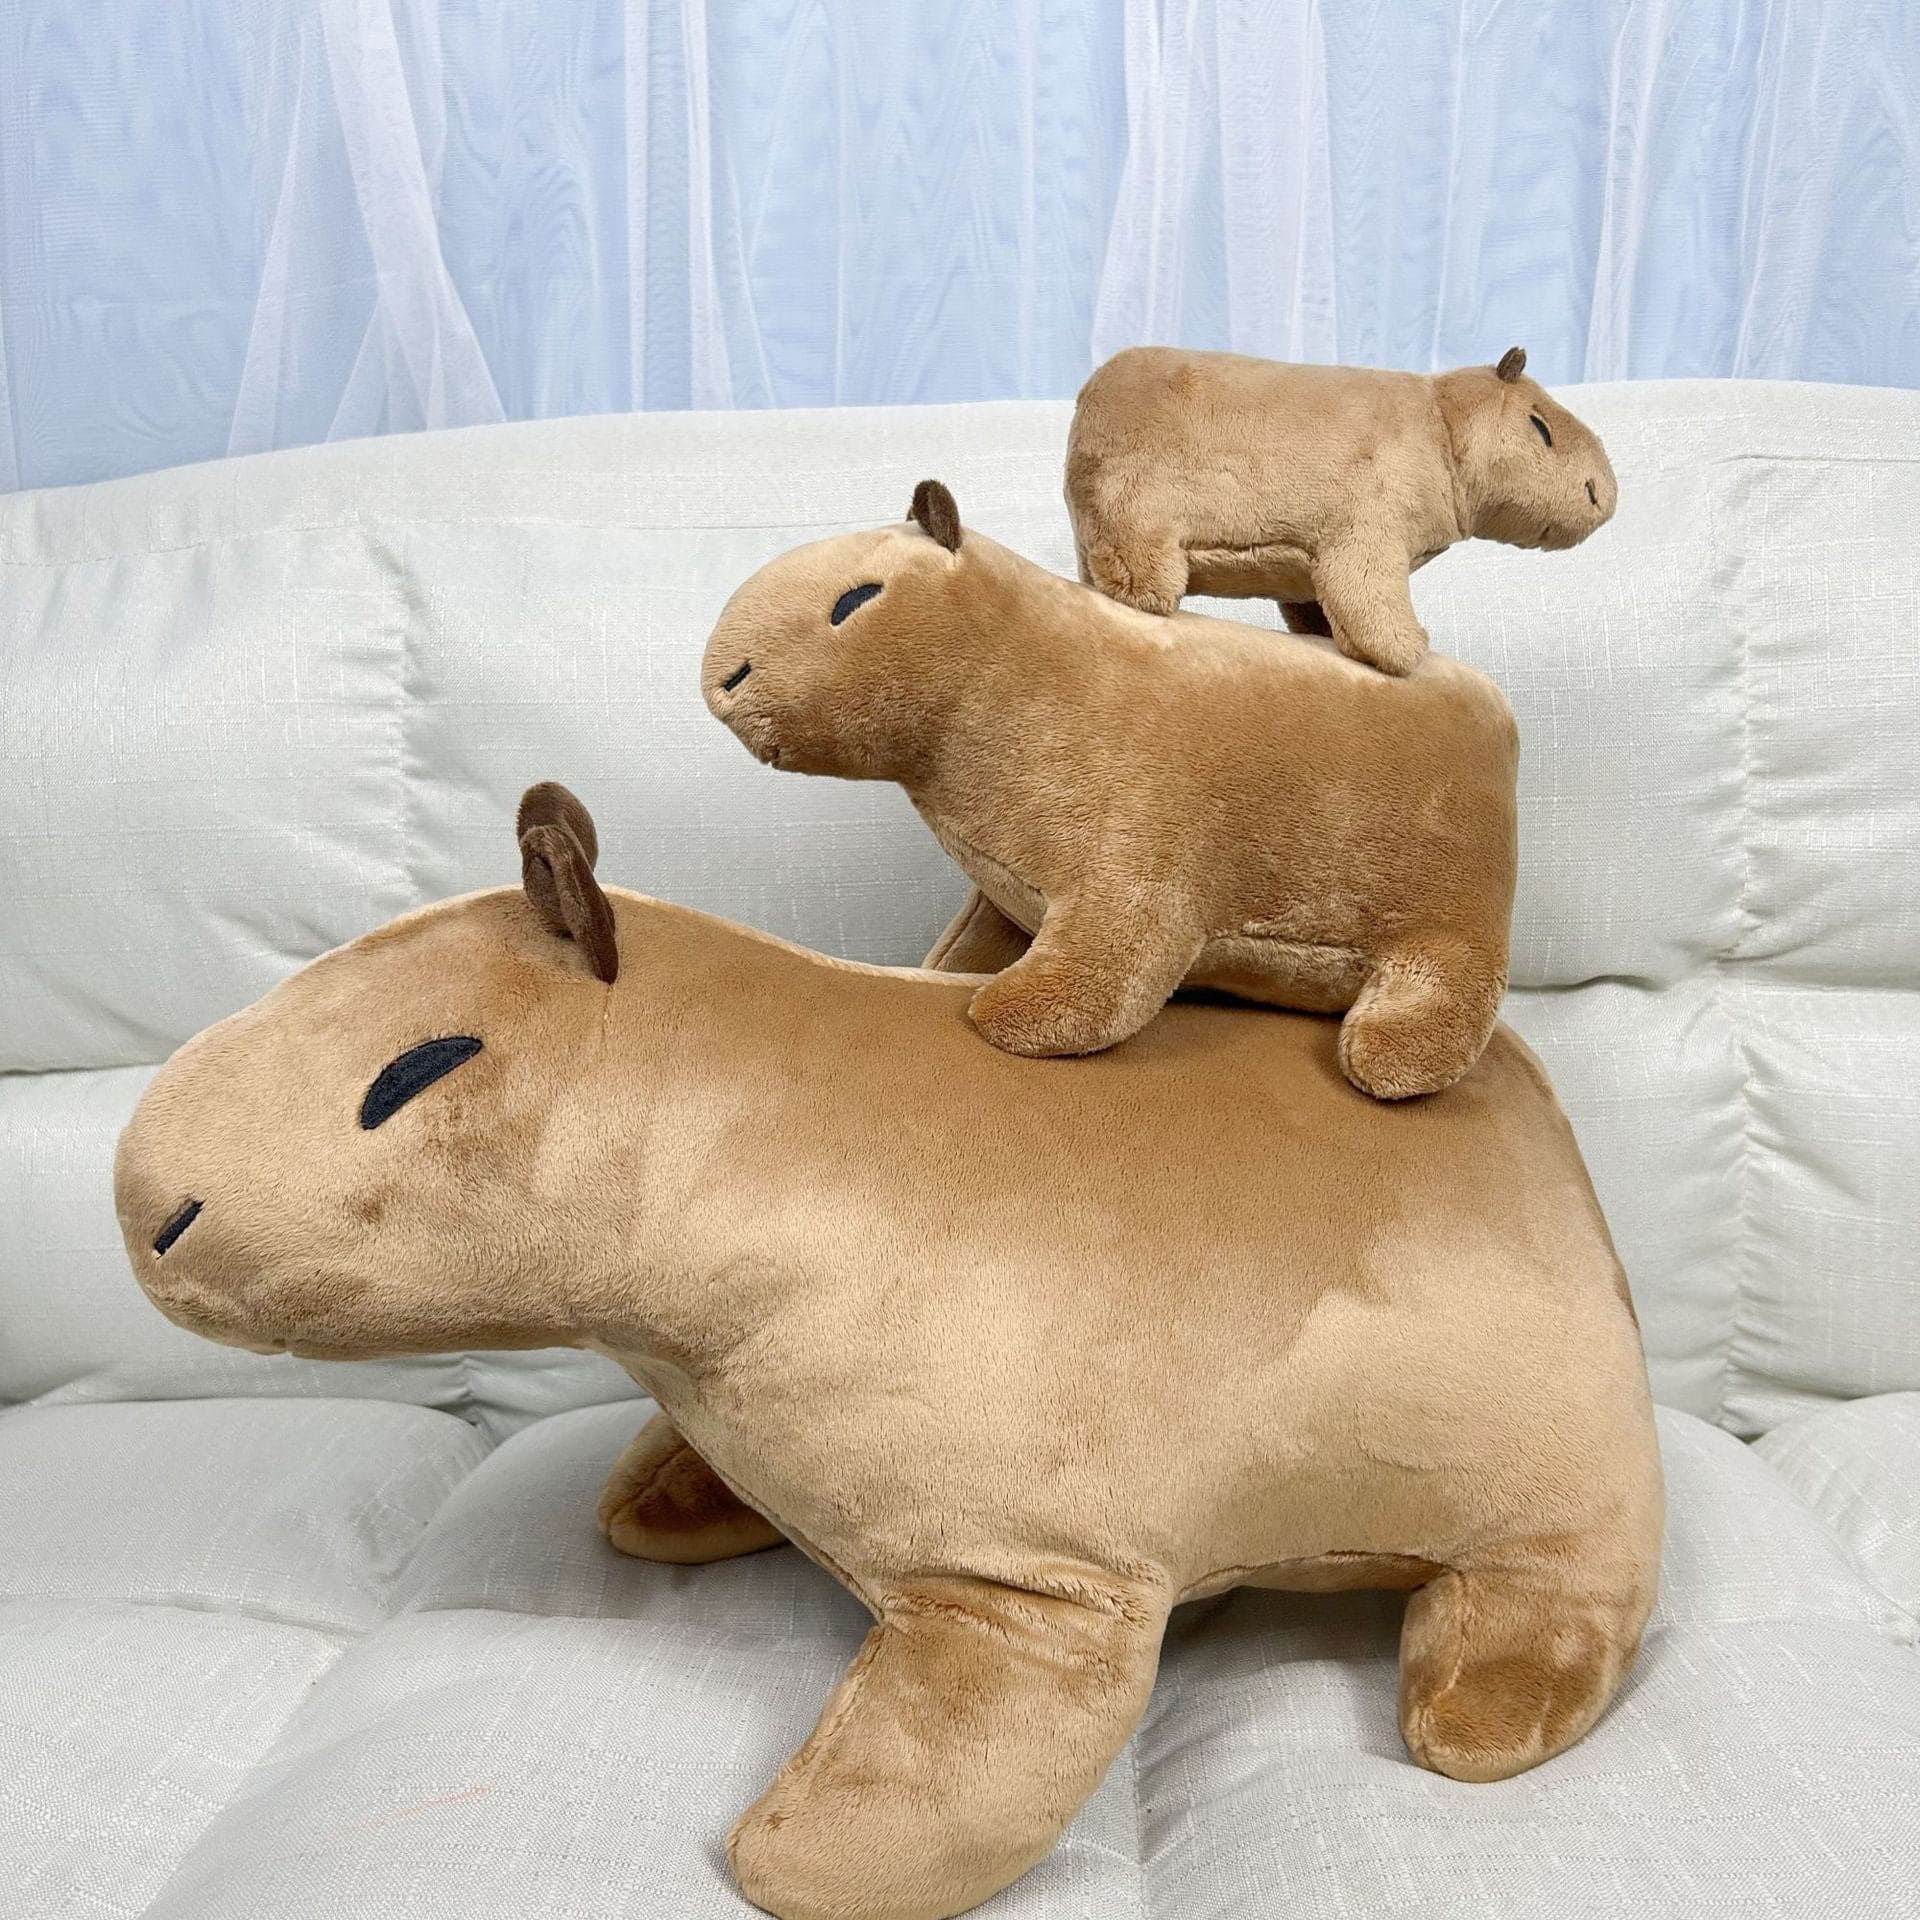 Capybara plush toys - Buy the best product with free shipping on